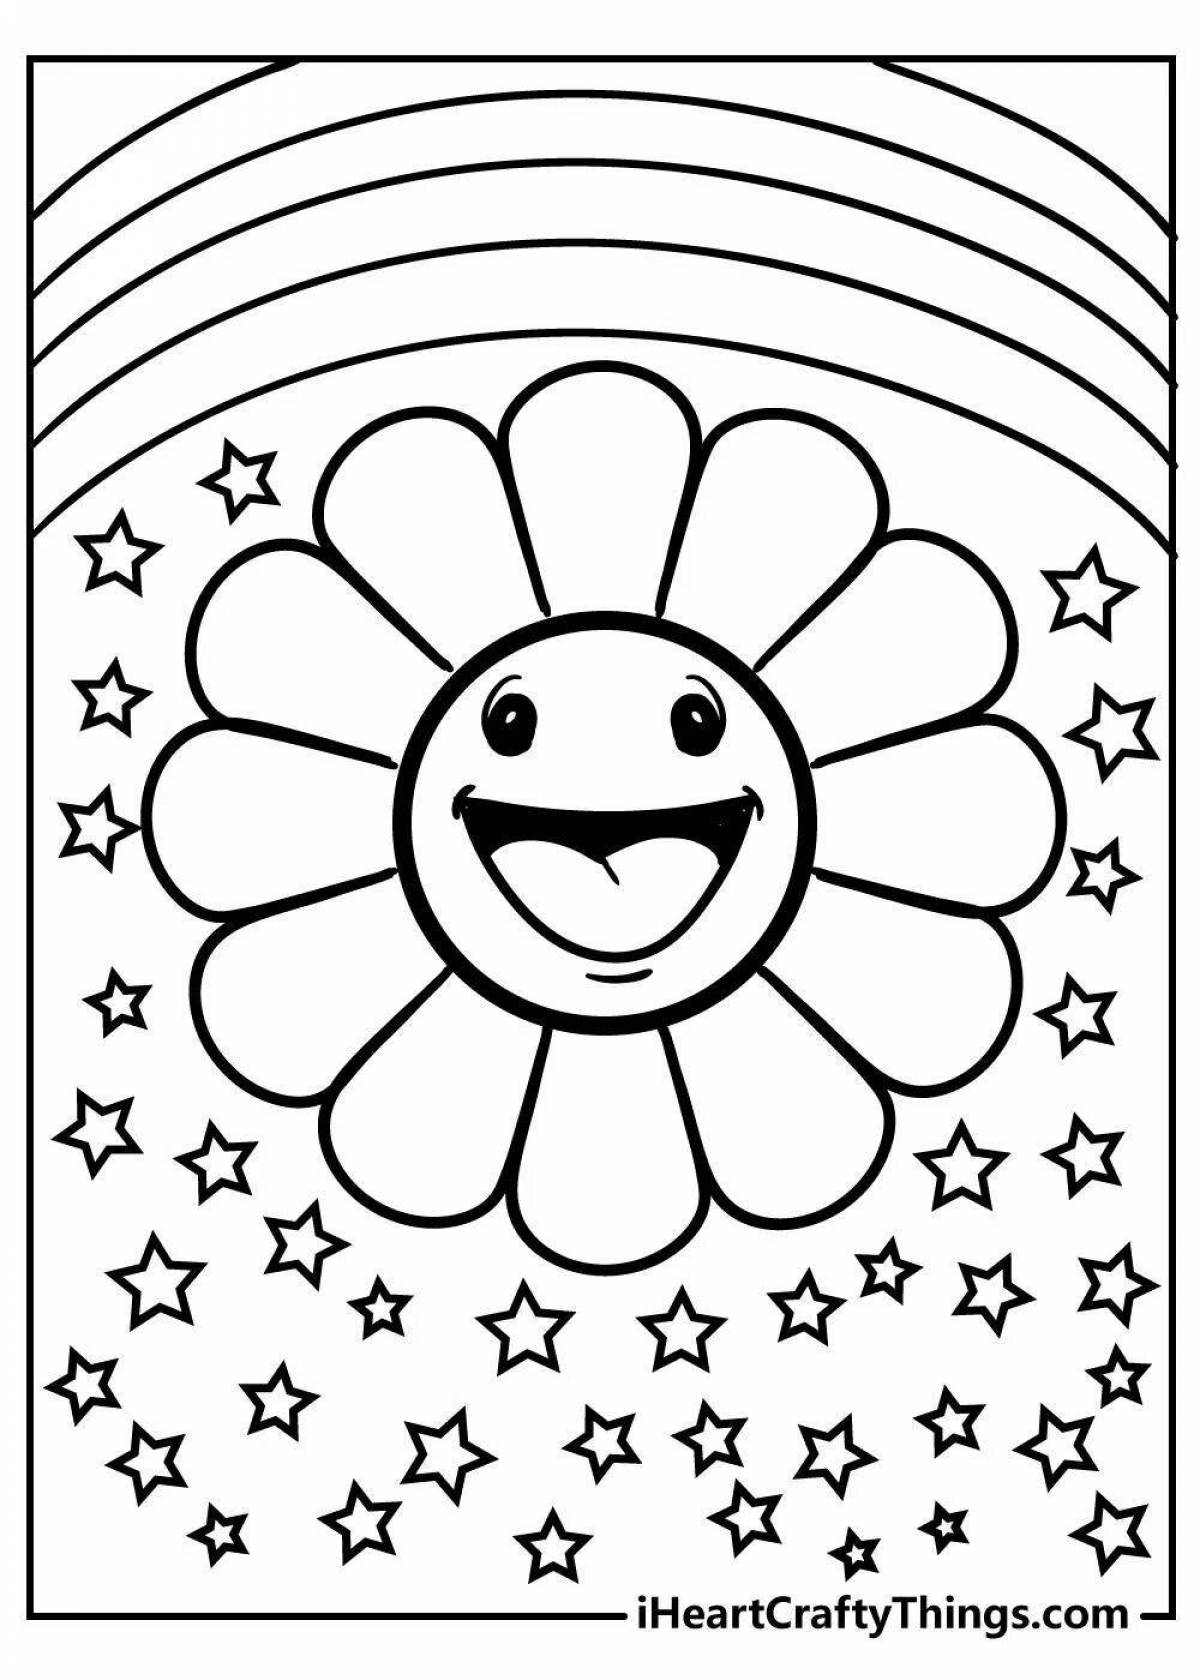 Colourful colorful rainbow friends coloring page